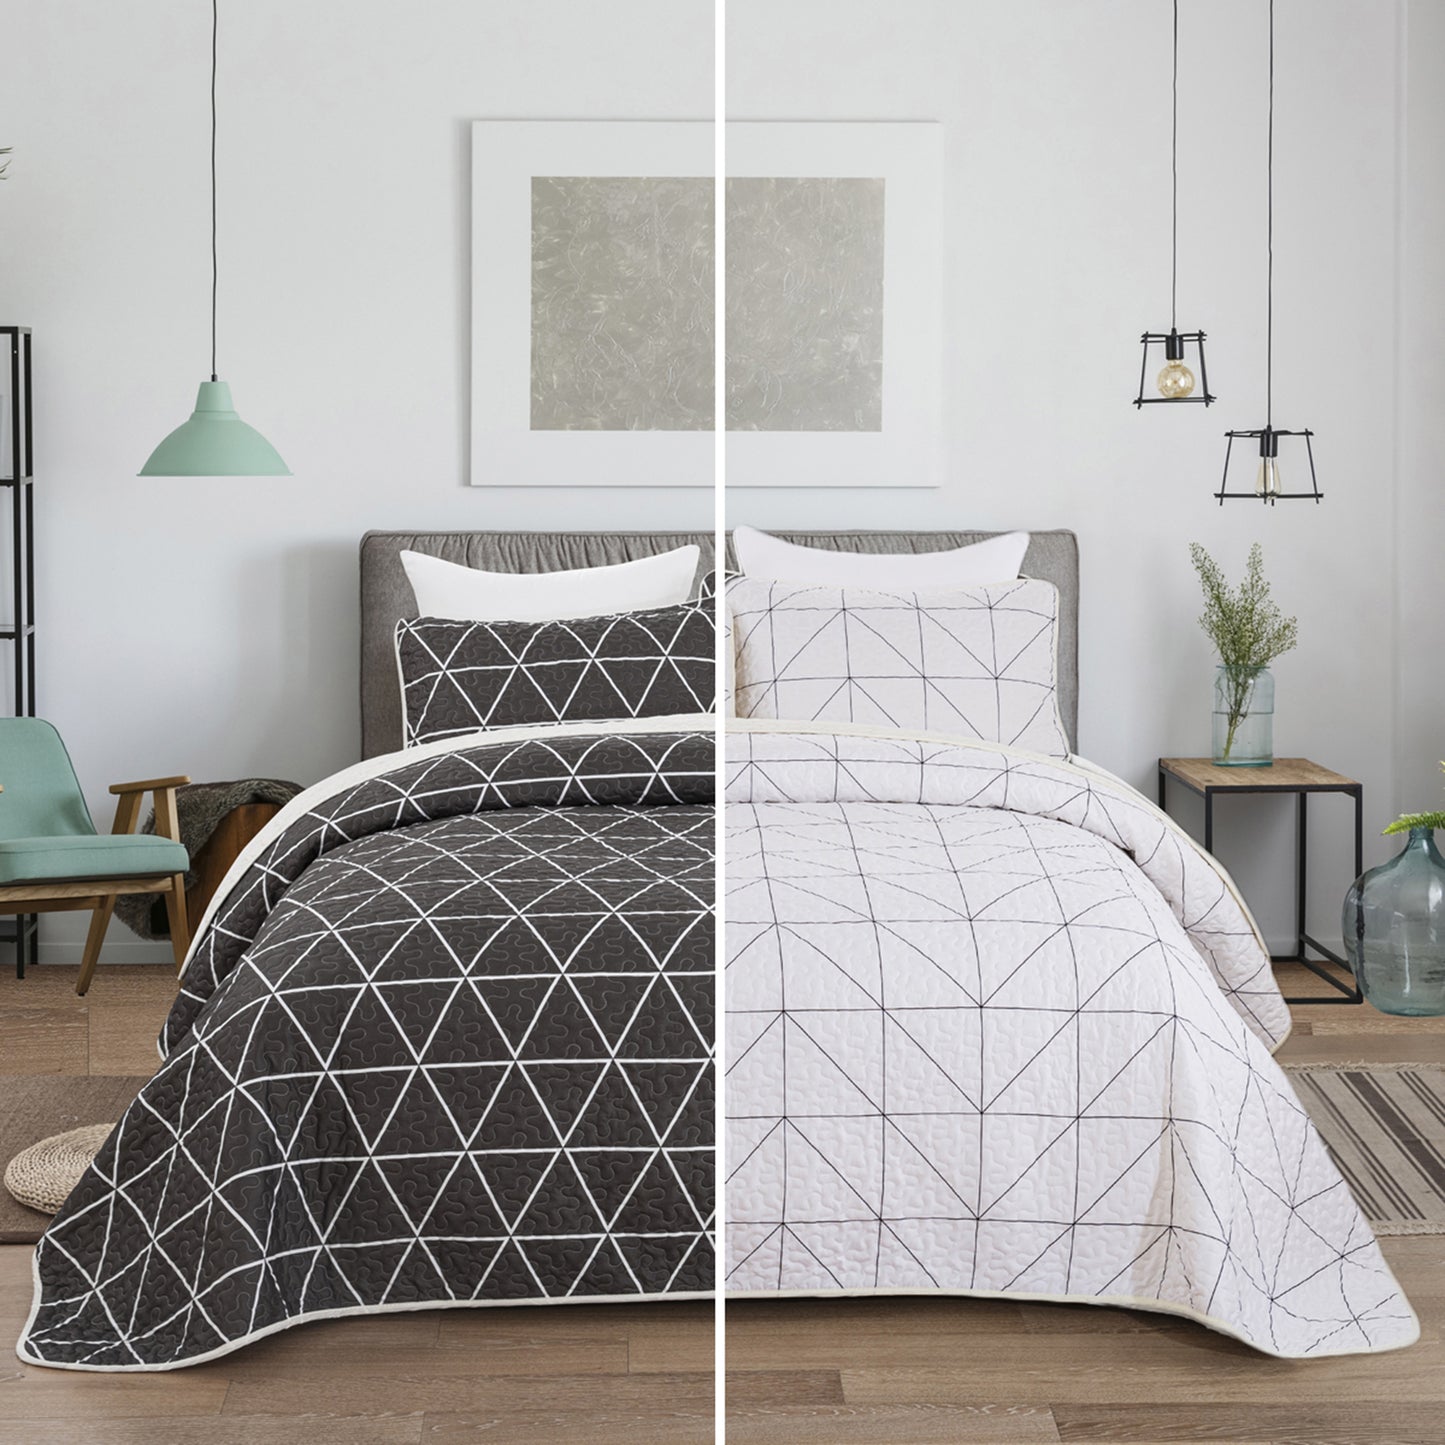 Black And White Double-sidedt 3 Pieces Quilt Set Coverlet with 2 Pillowcases